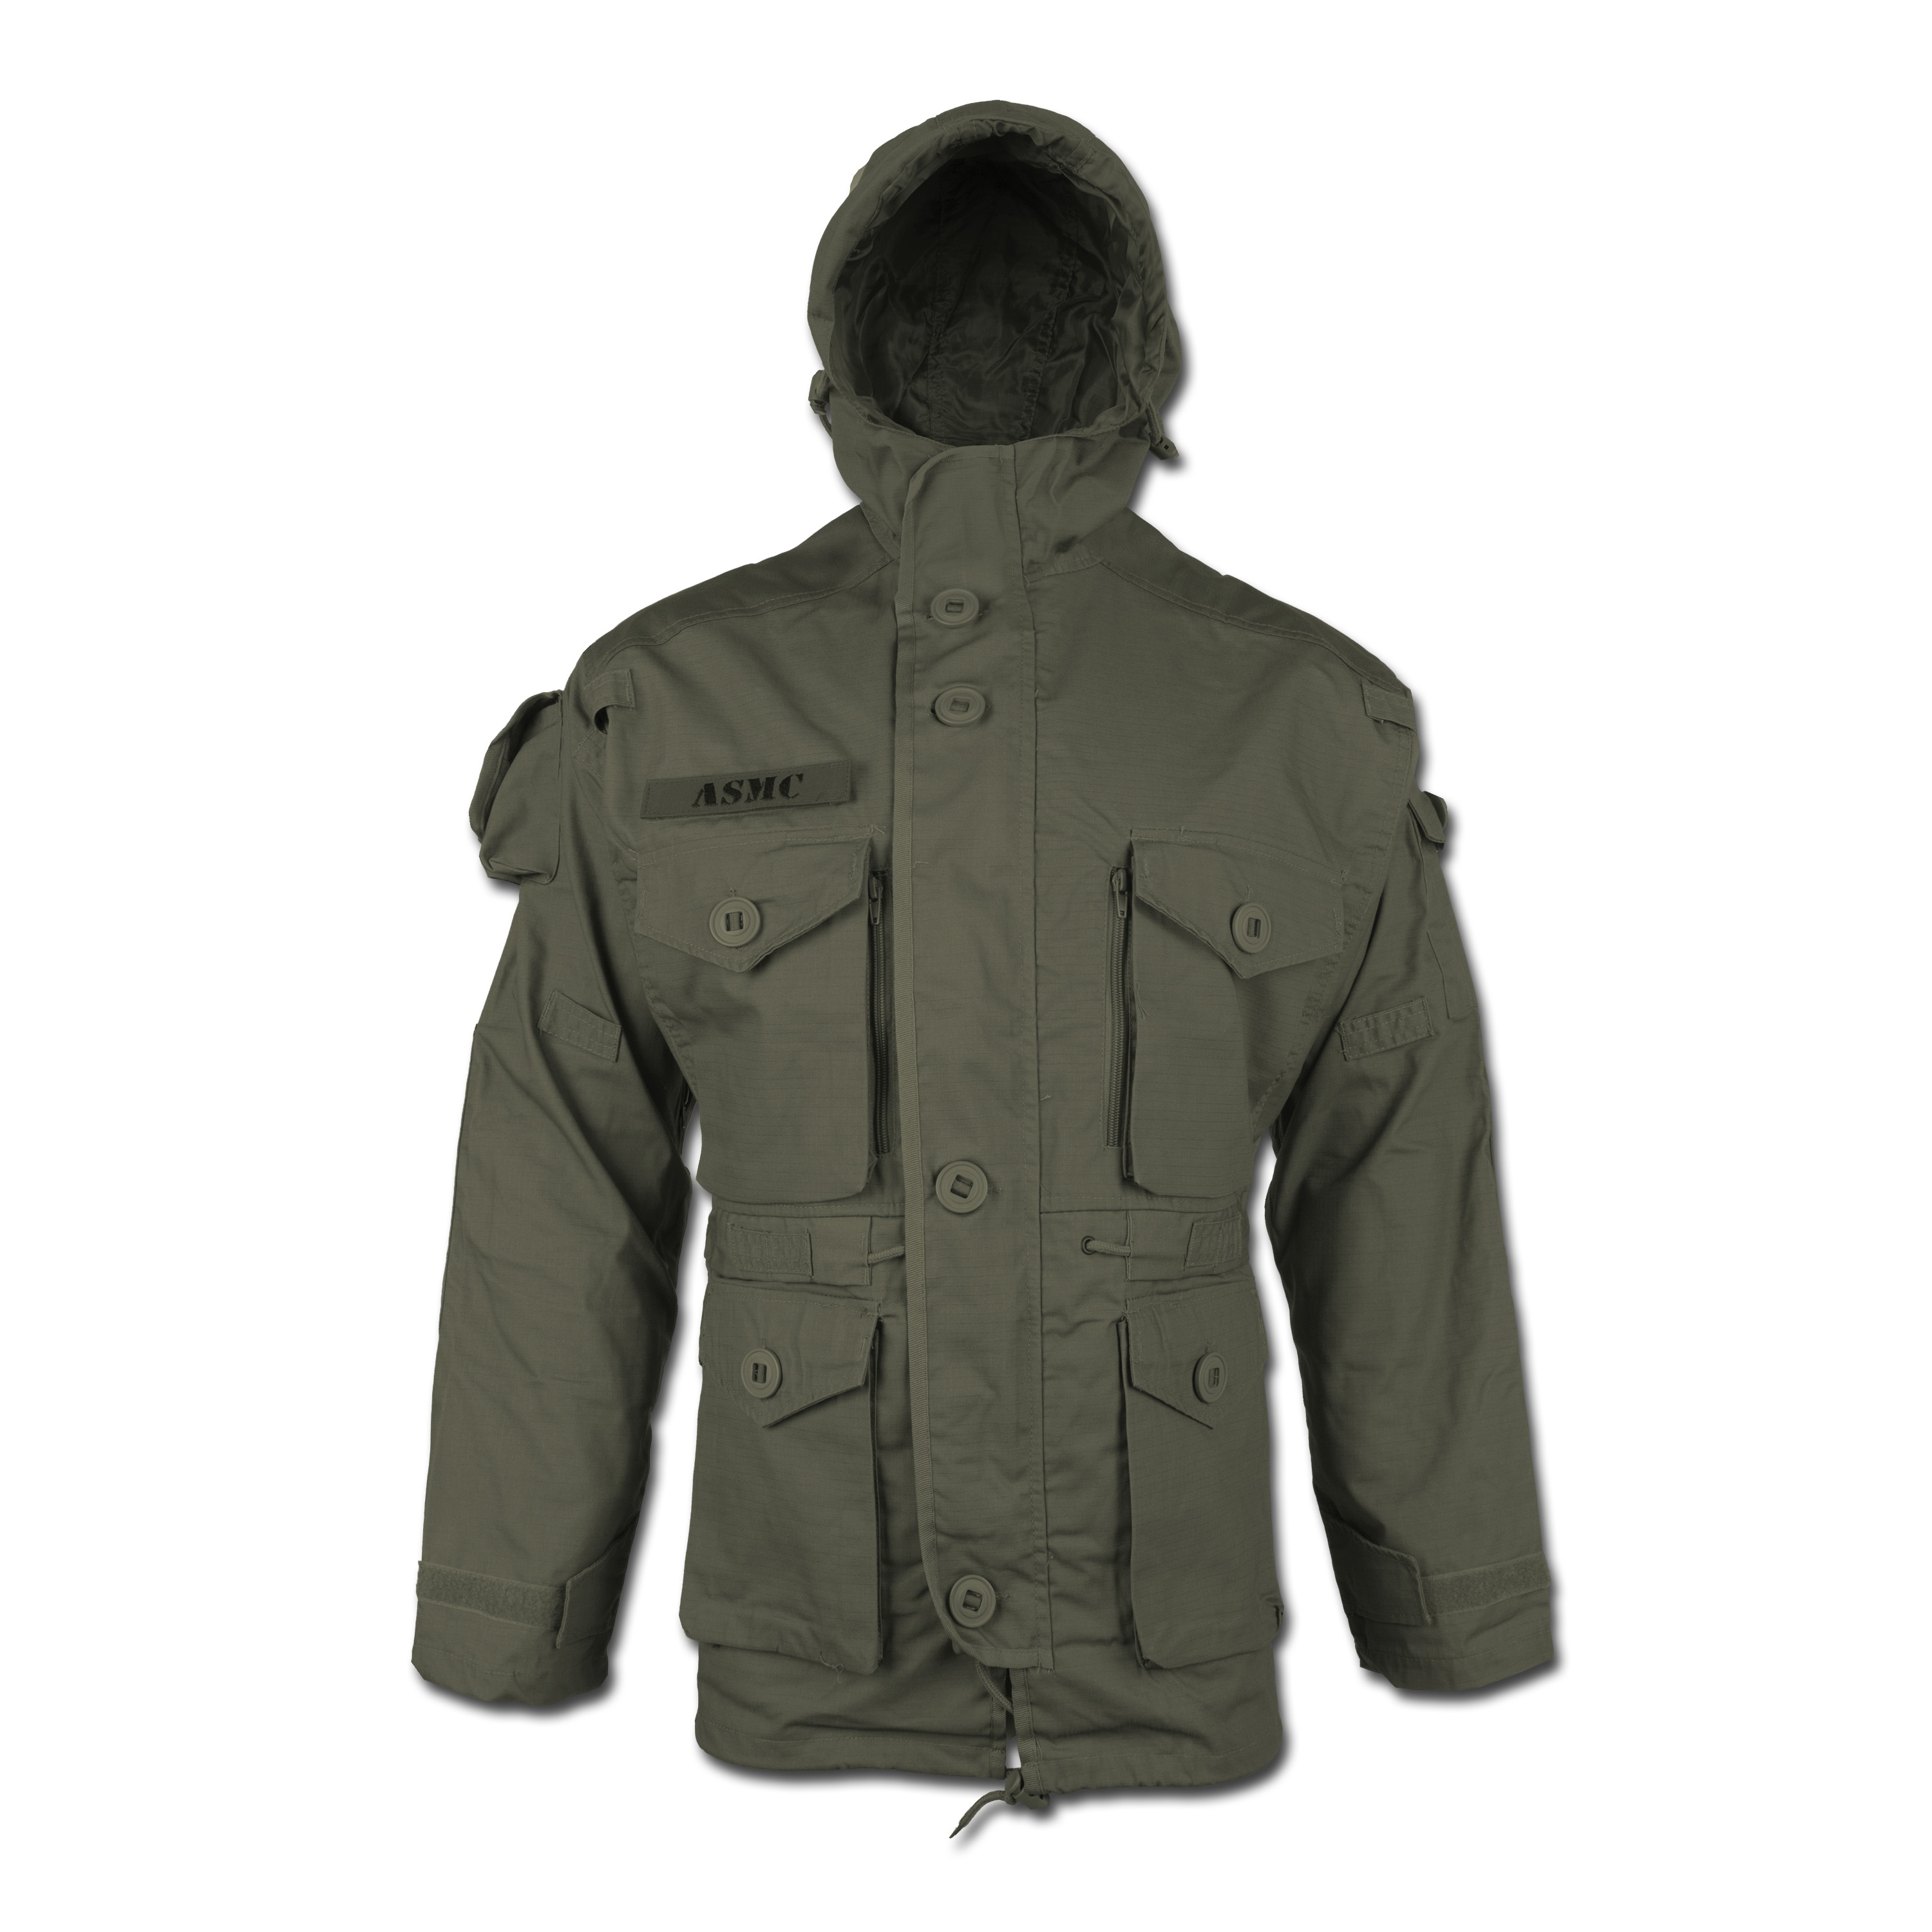 Purchase the Mil-Tec Lightweight Smock olive by ASMC